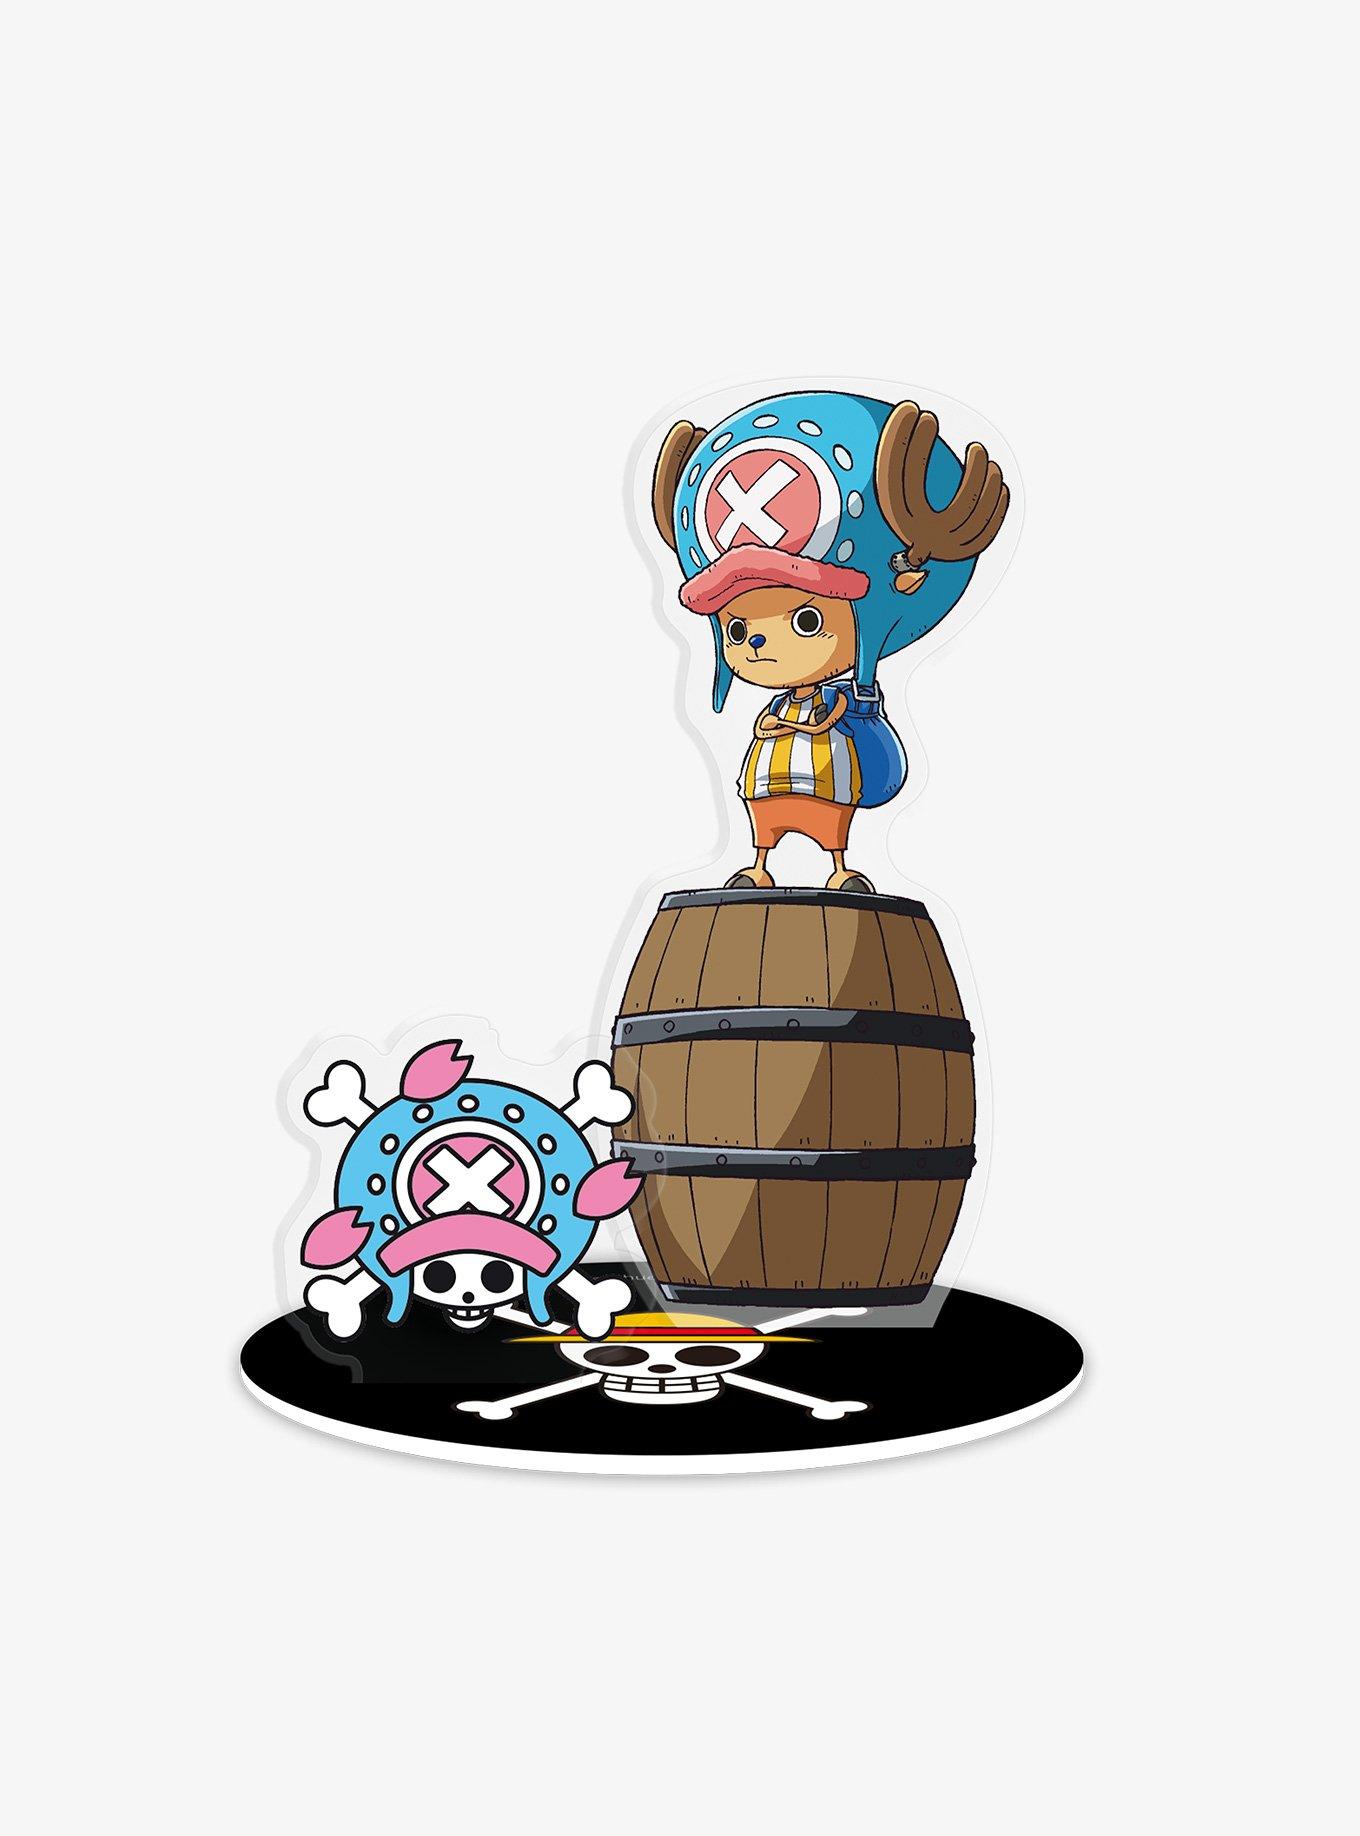 https://media.gamestop.com/i/gamestop/20005675_ALT02/ABYstyle-One-Piece-Brook-and-Chopper-Acryl-4-in-Figure-Set?$pdp$